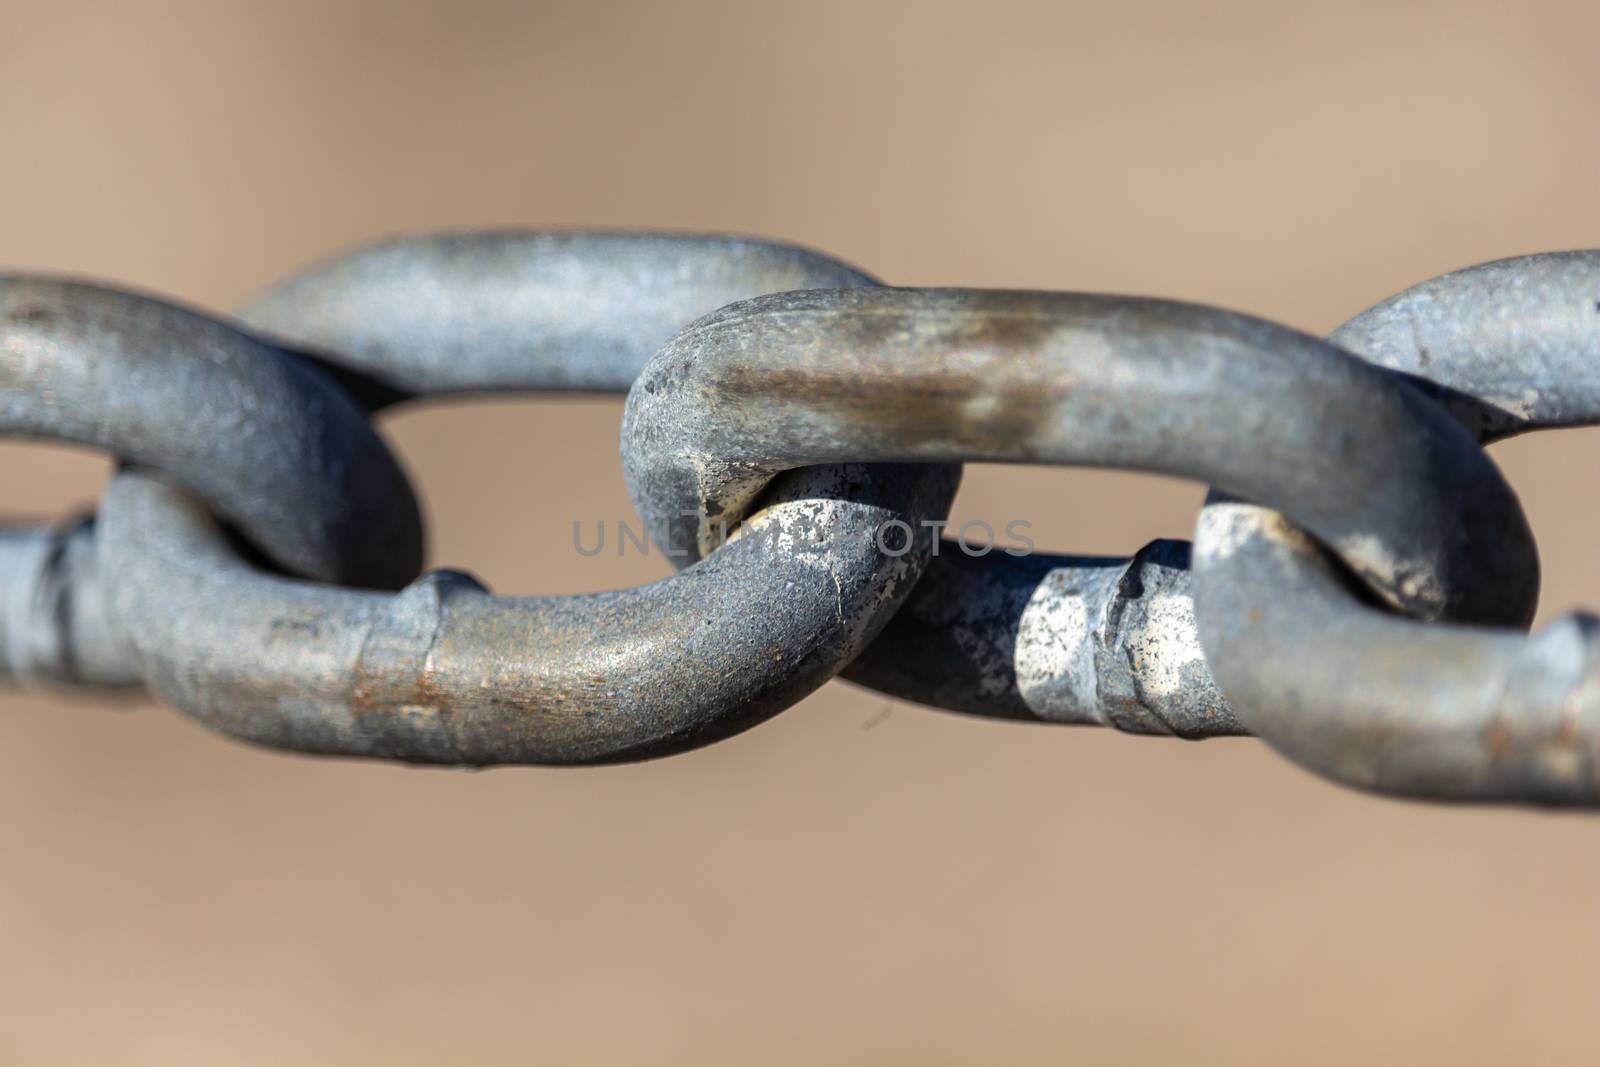 The links of a steel chain are seen up close. The chain is held up taut and viewed against a blurry beige background. Some wear and weathered detail is seen, showing its outdoor exposure.